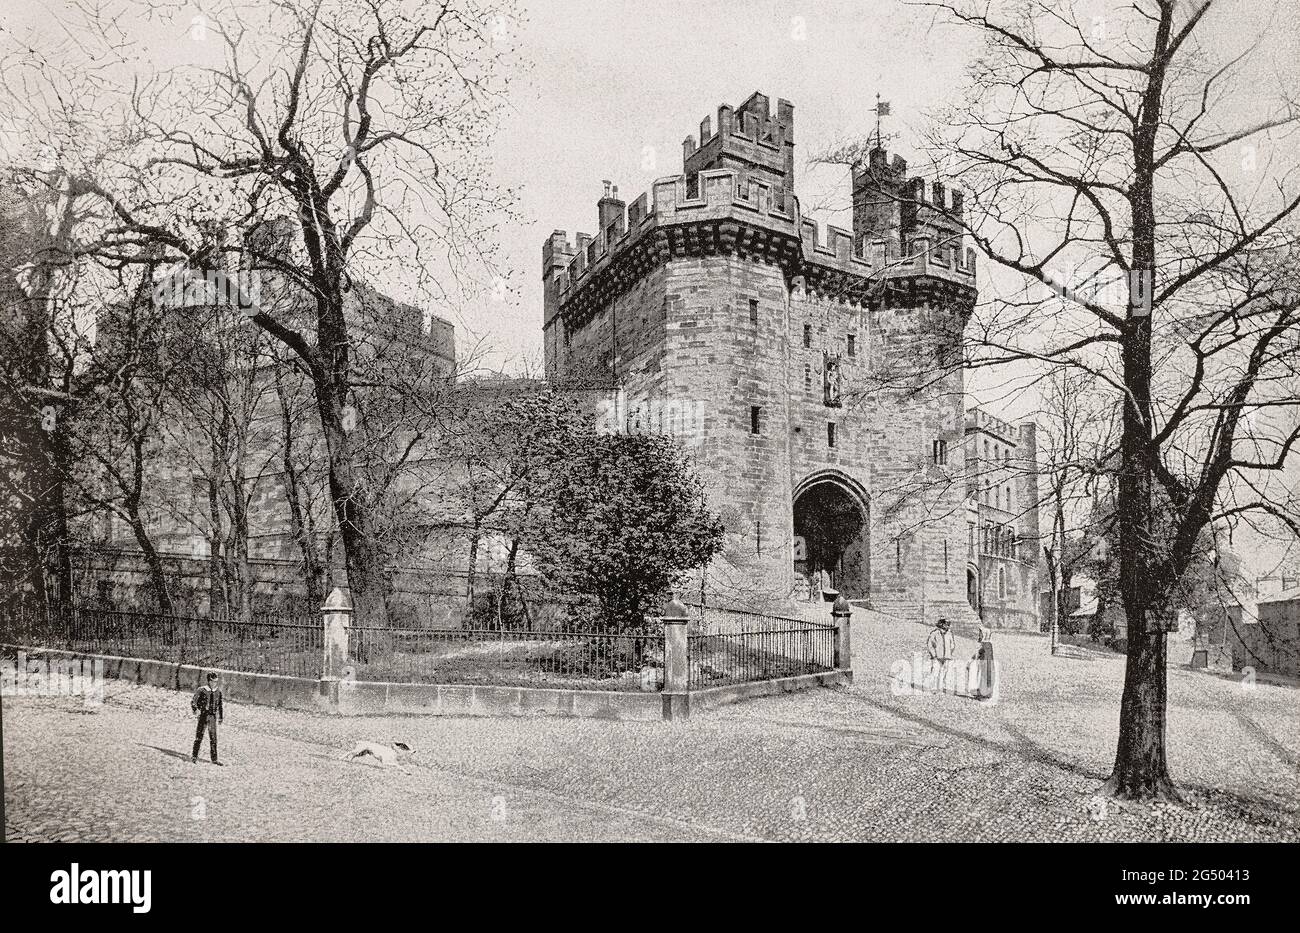 A late 19th century view of the main gatehouse to Lancaster Castle built at the start of the 15th century, instigated by King Henry IV, although legend attributes the work to John of Gaunt. A medieval castle in Lancaster in the English county of Lancashire it saw action in 1322 and 1389 when the Scots invaded England, progressing as far as Lancaster and damaging the castle. In the English Civil War, the castle was used as a prison. Stock Photo